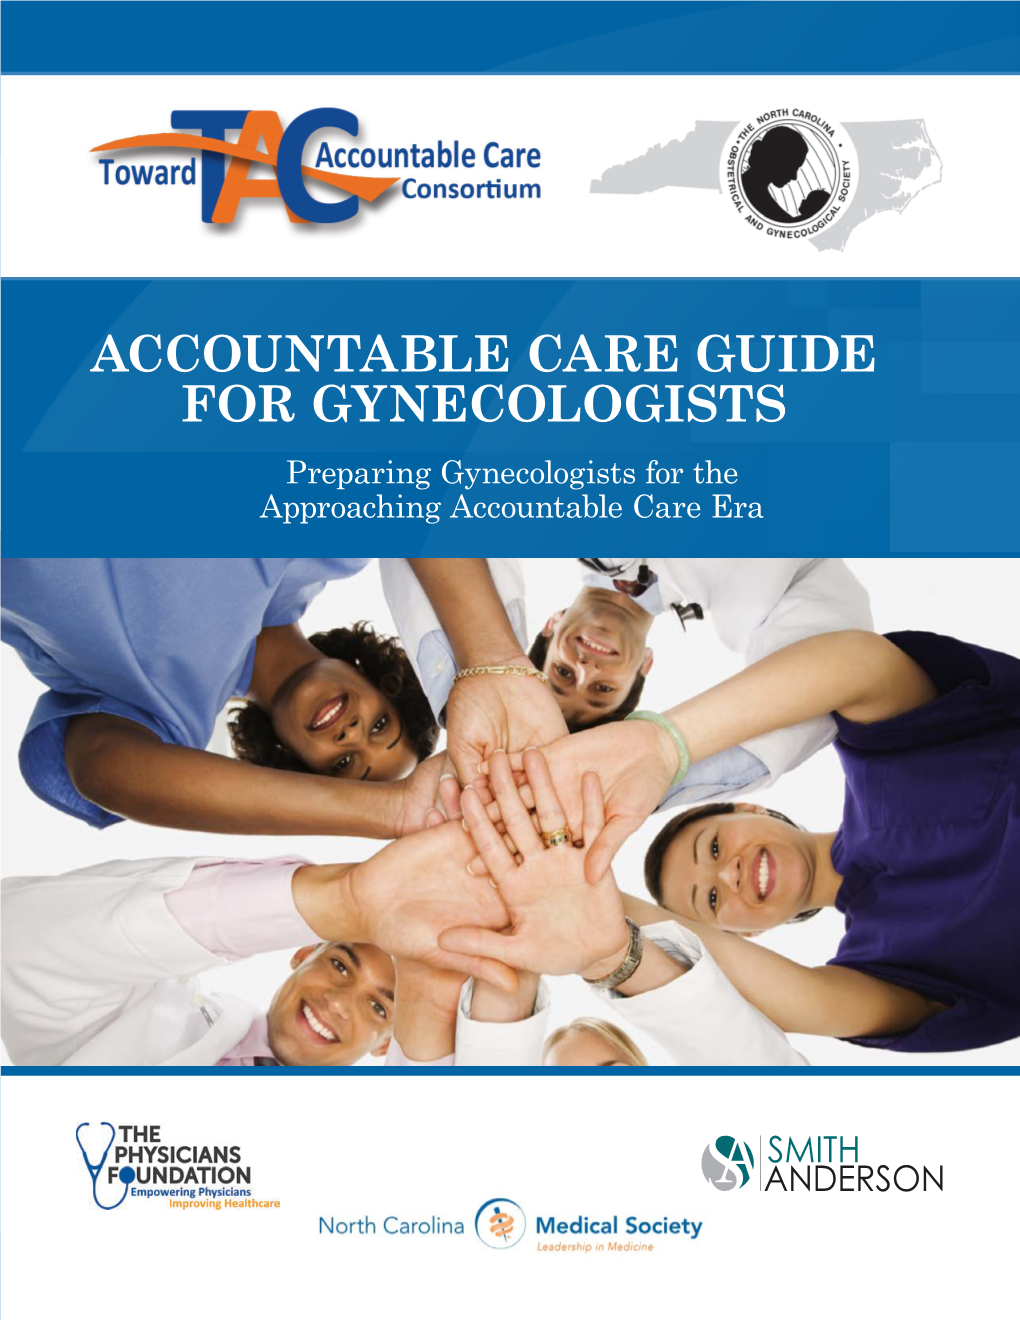 Accountable Care Guide for Gynecologists